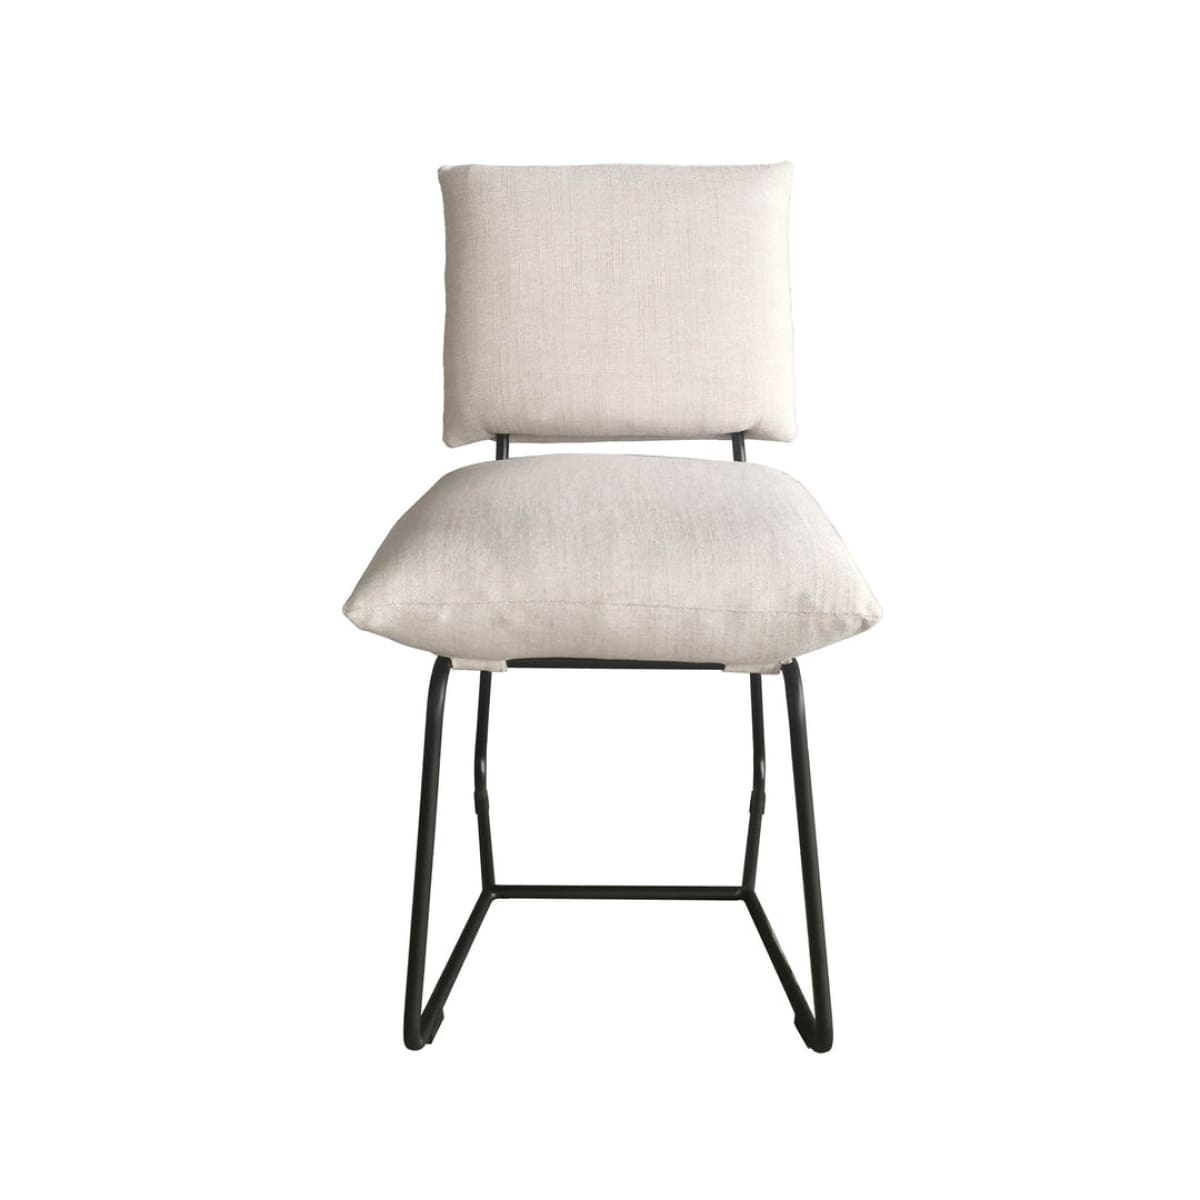 Peter Dining Chair - lh-import-dining-chairs